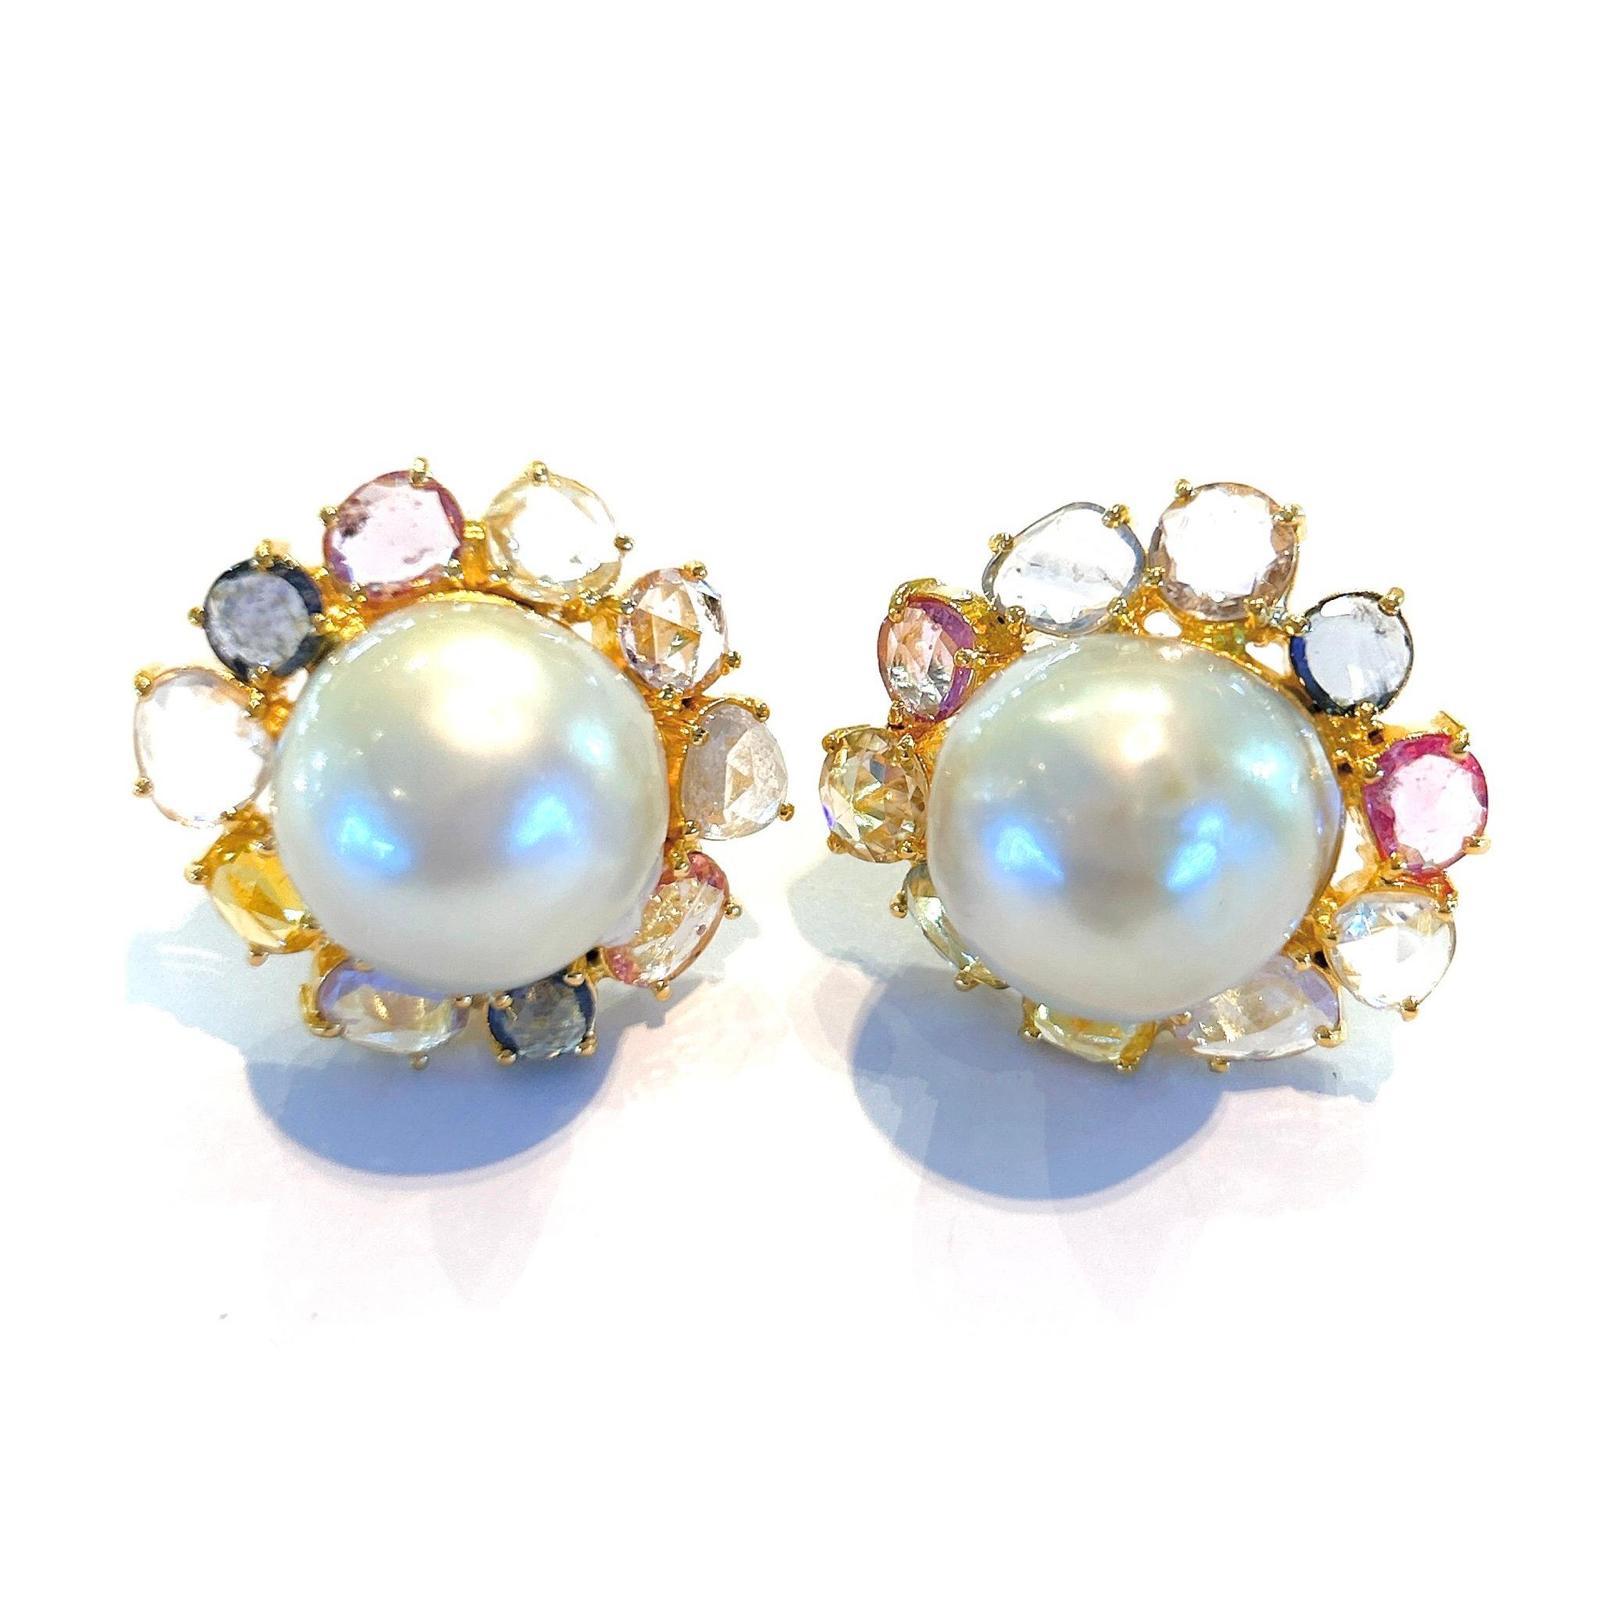 Bochic “Capri” Rose Cut Sapphires & Pearl Earrings Set In 18K Gold & Silver 
Multi Pastel Color Rose Cut Natural Sapphires from Sri Lanka 
14 carats 
White pearls with pink tone 
The earrings from the 